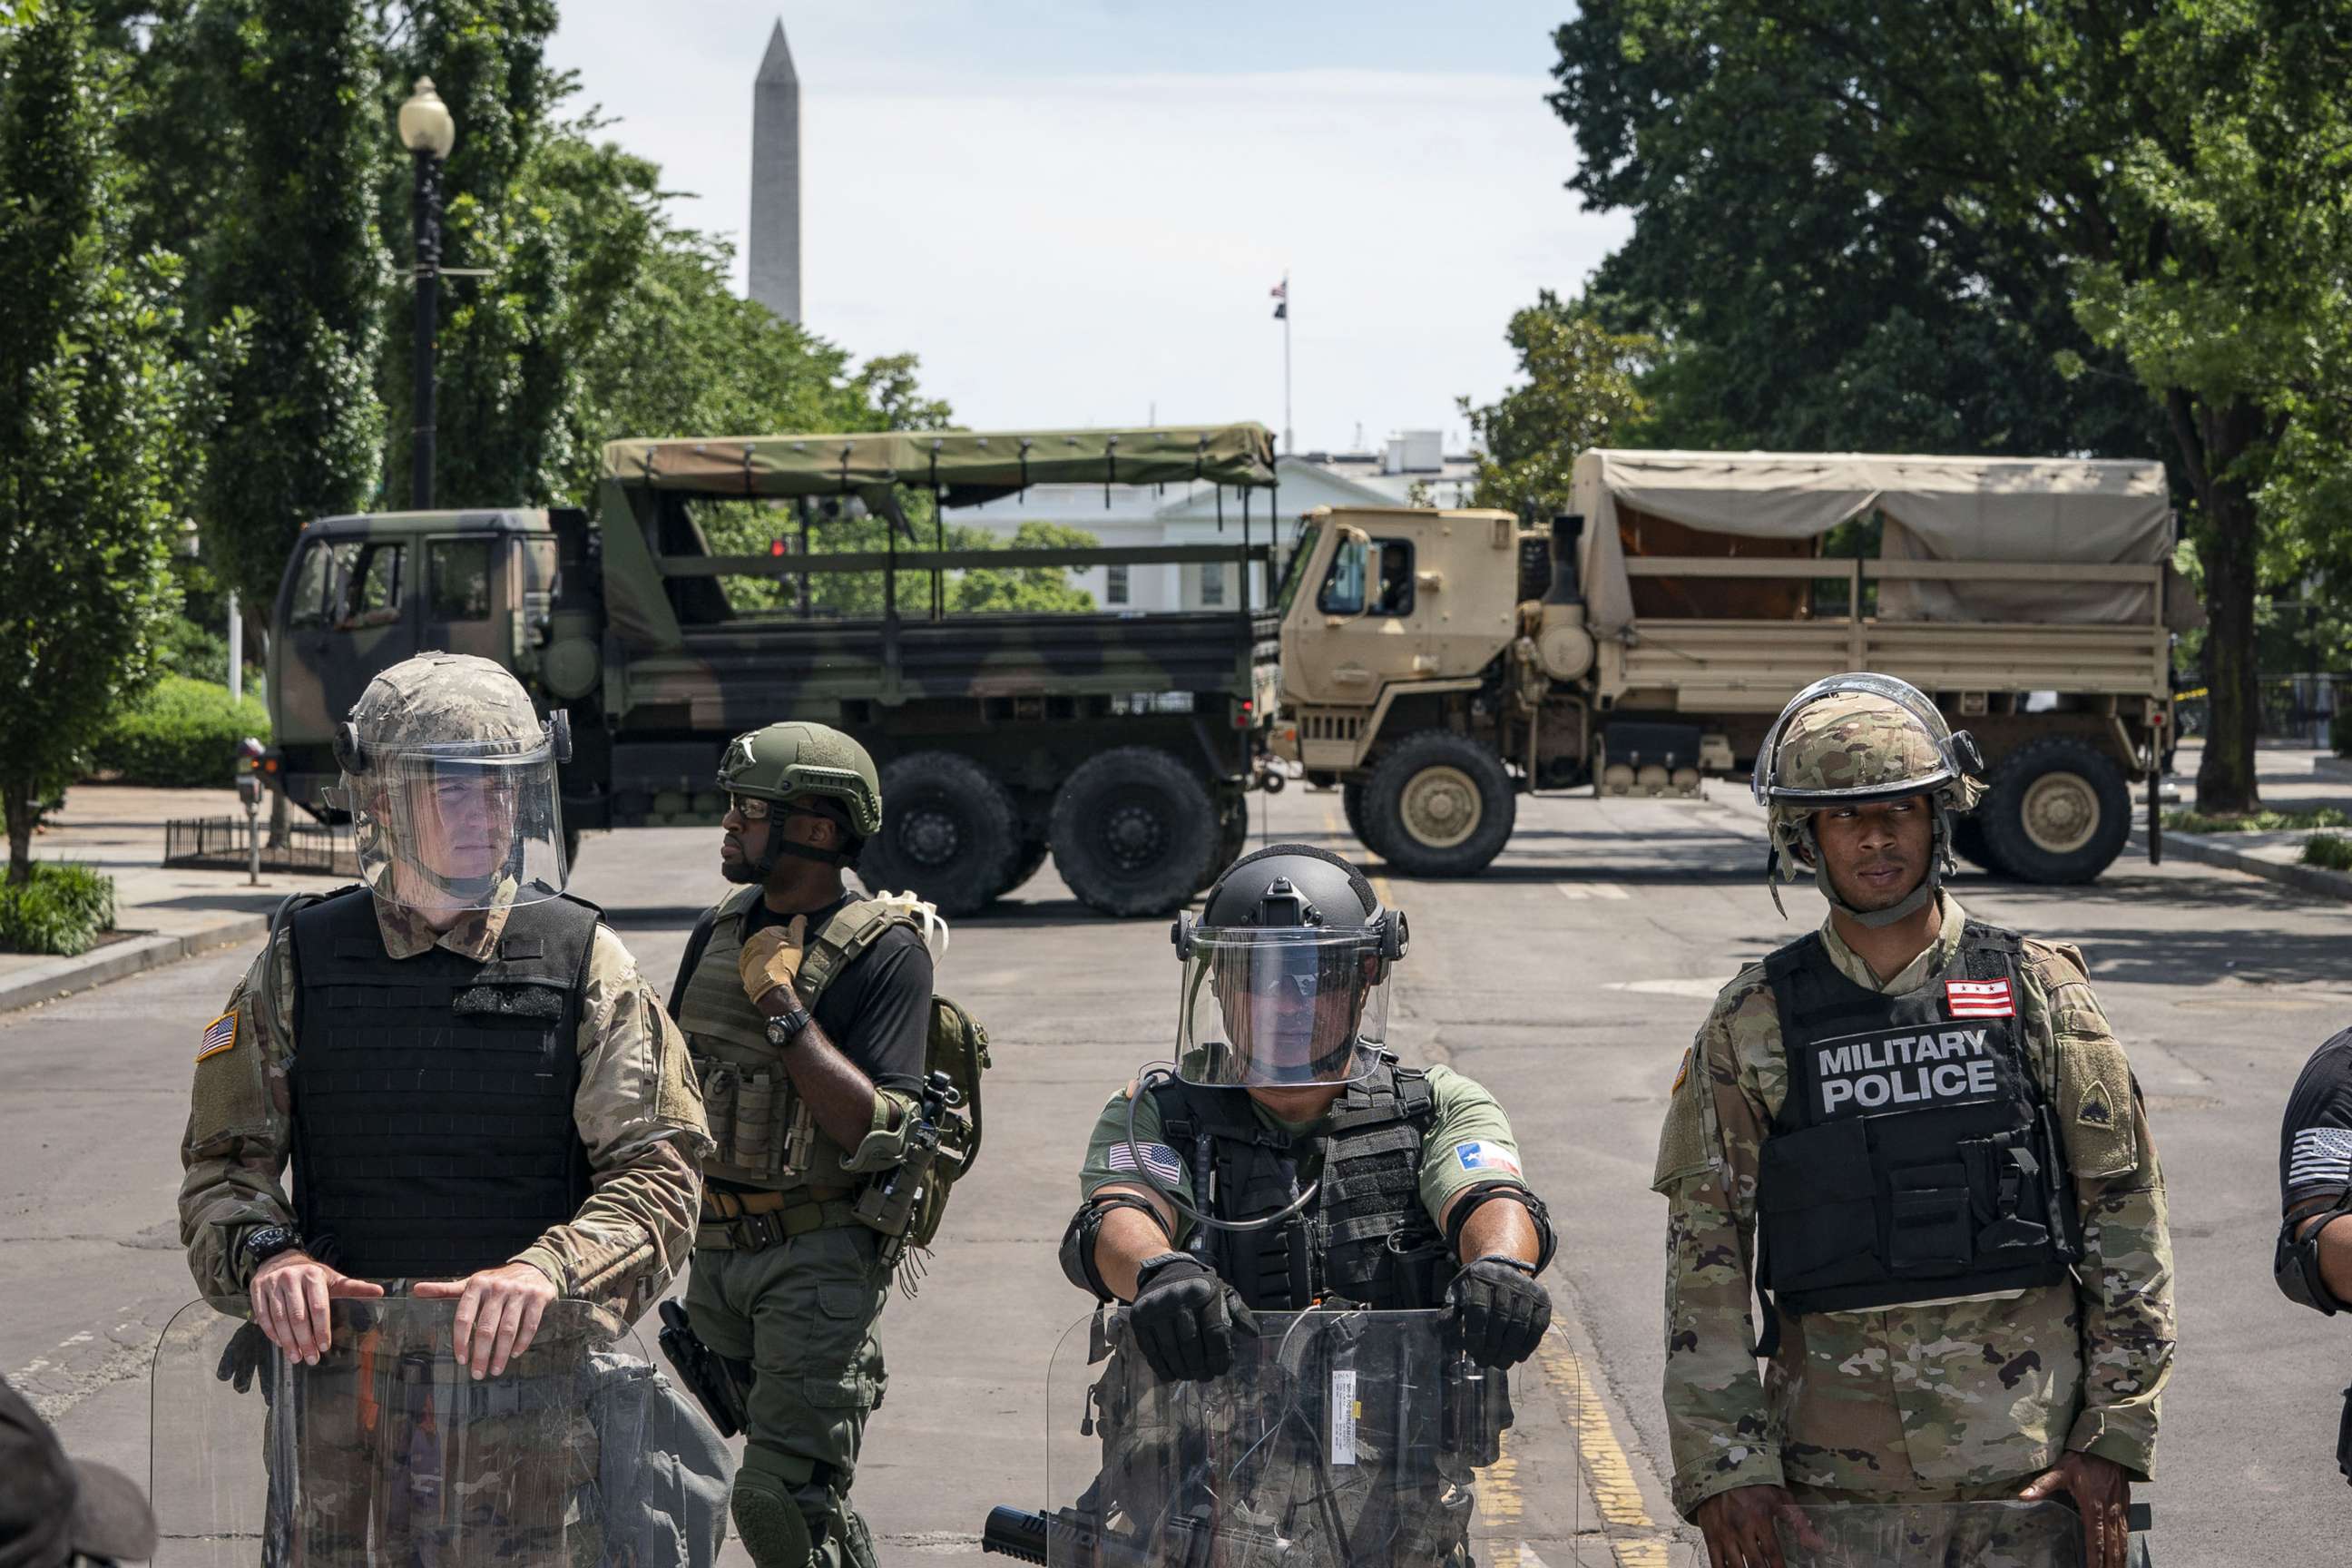 PHOTO: Police forces and National Guard vehicles are used to block 16th Street near Lafayette Park and the White House on June 3, 2020.